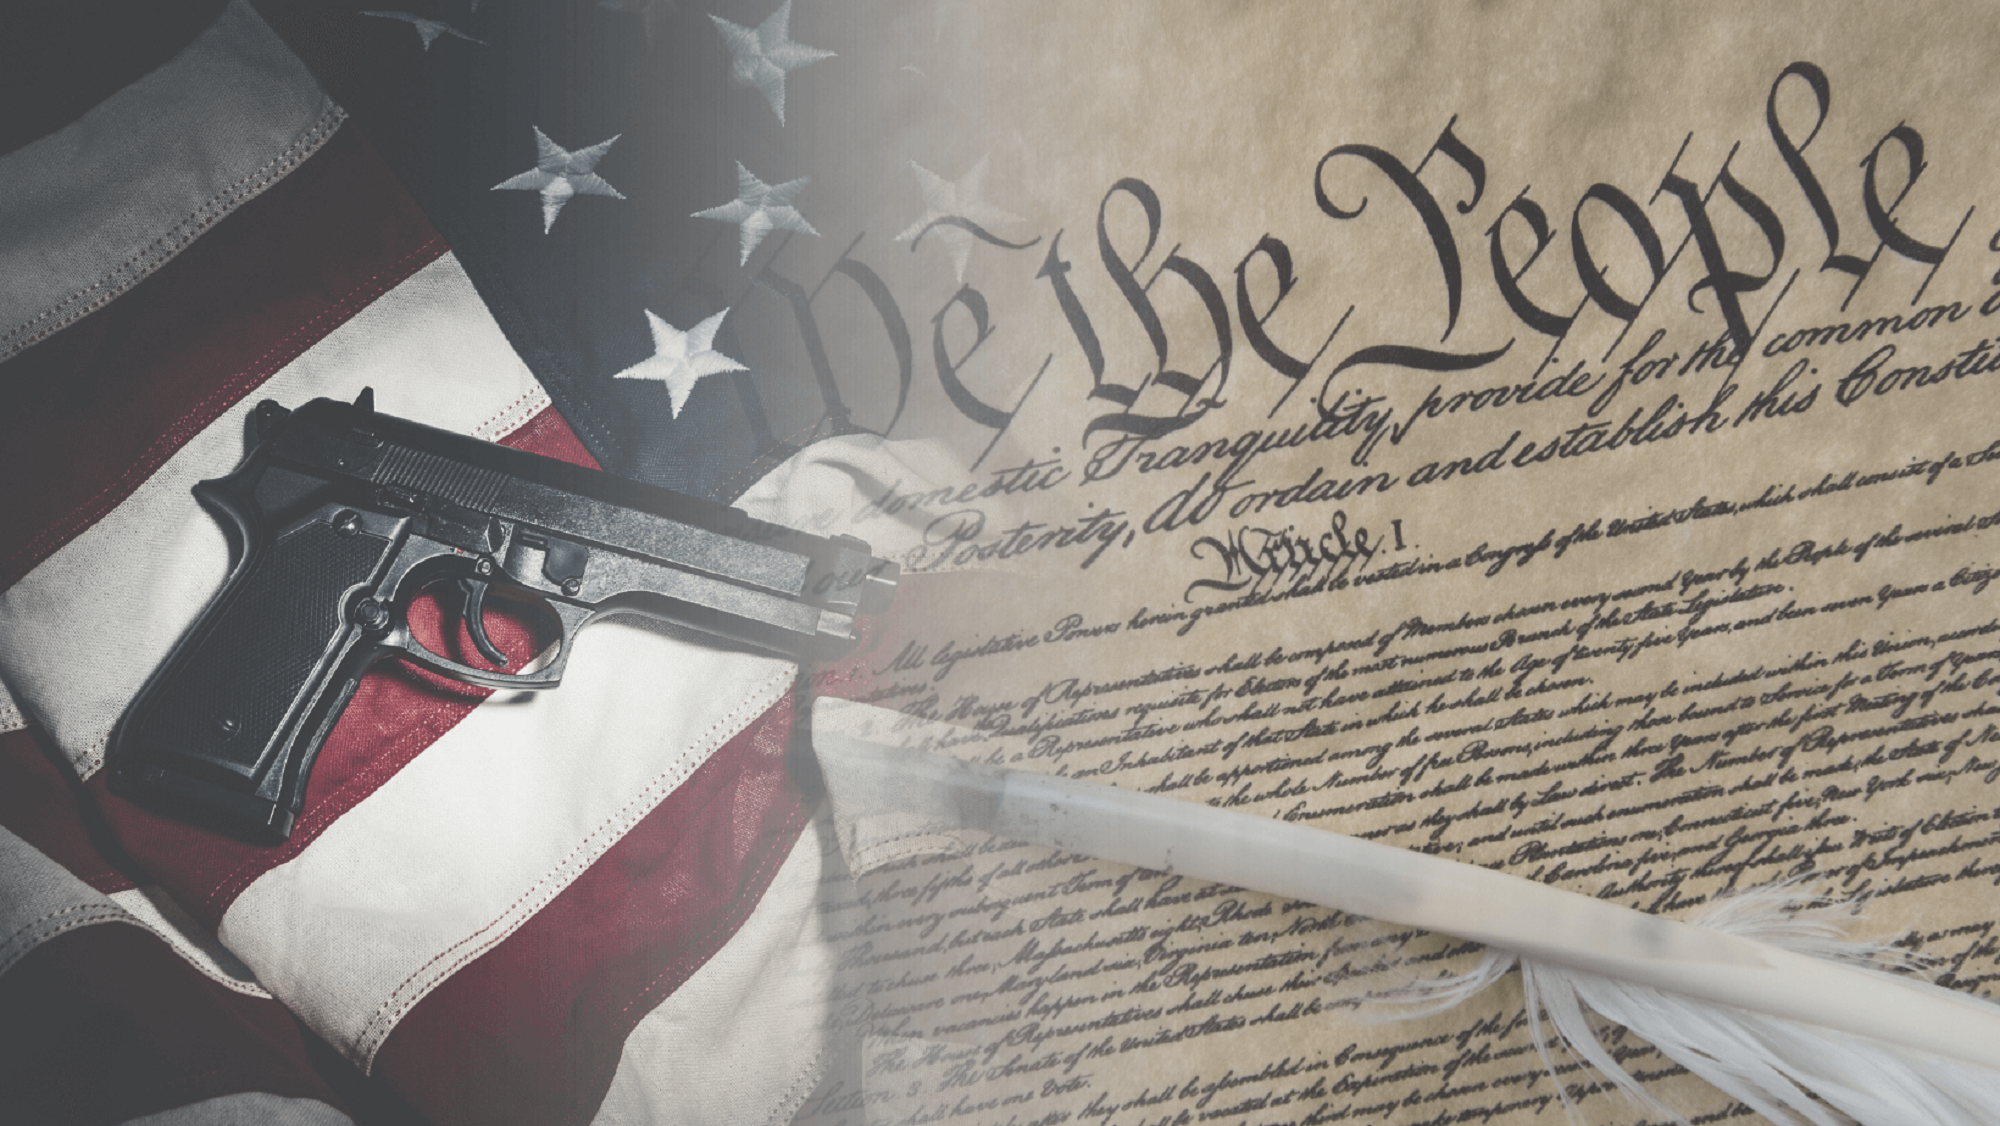 Illustrated image featuring the US Constitution with a handgun and American flag